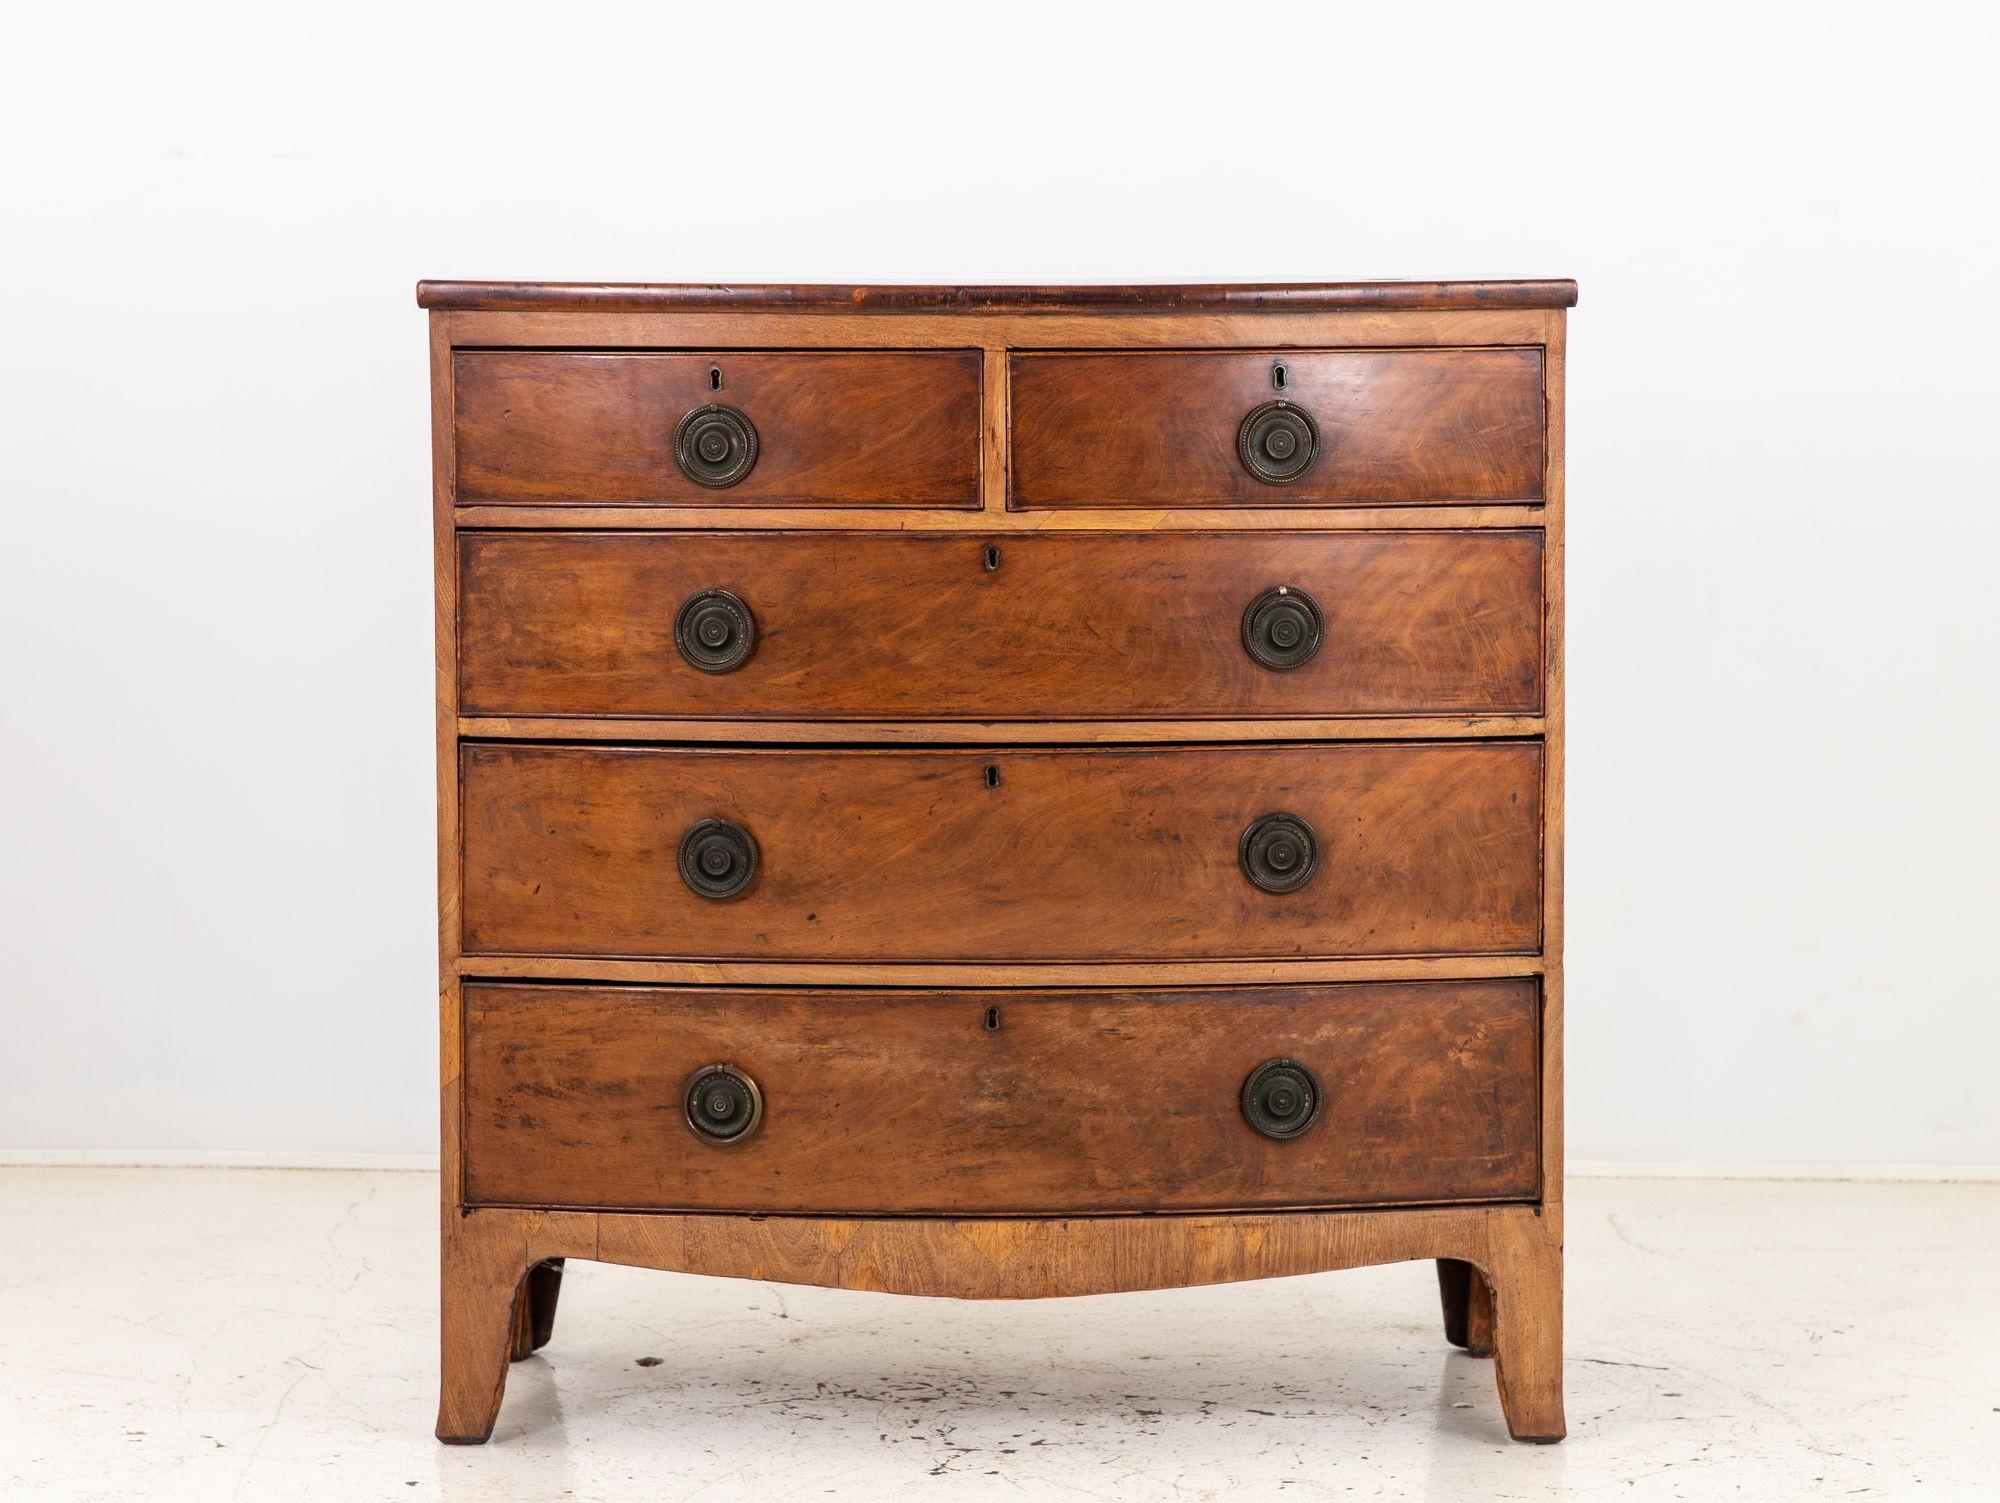 Elegance meets history in this late 19th-century French Bowfront Chest of Drawers. Crafted with meticulous attention to detail, it boasts a gently curving front that lends a graceful and timeless allure. The warm patina of aged wood showcases the